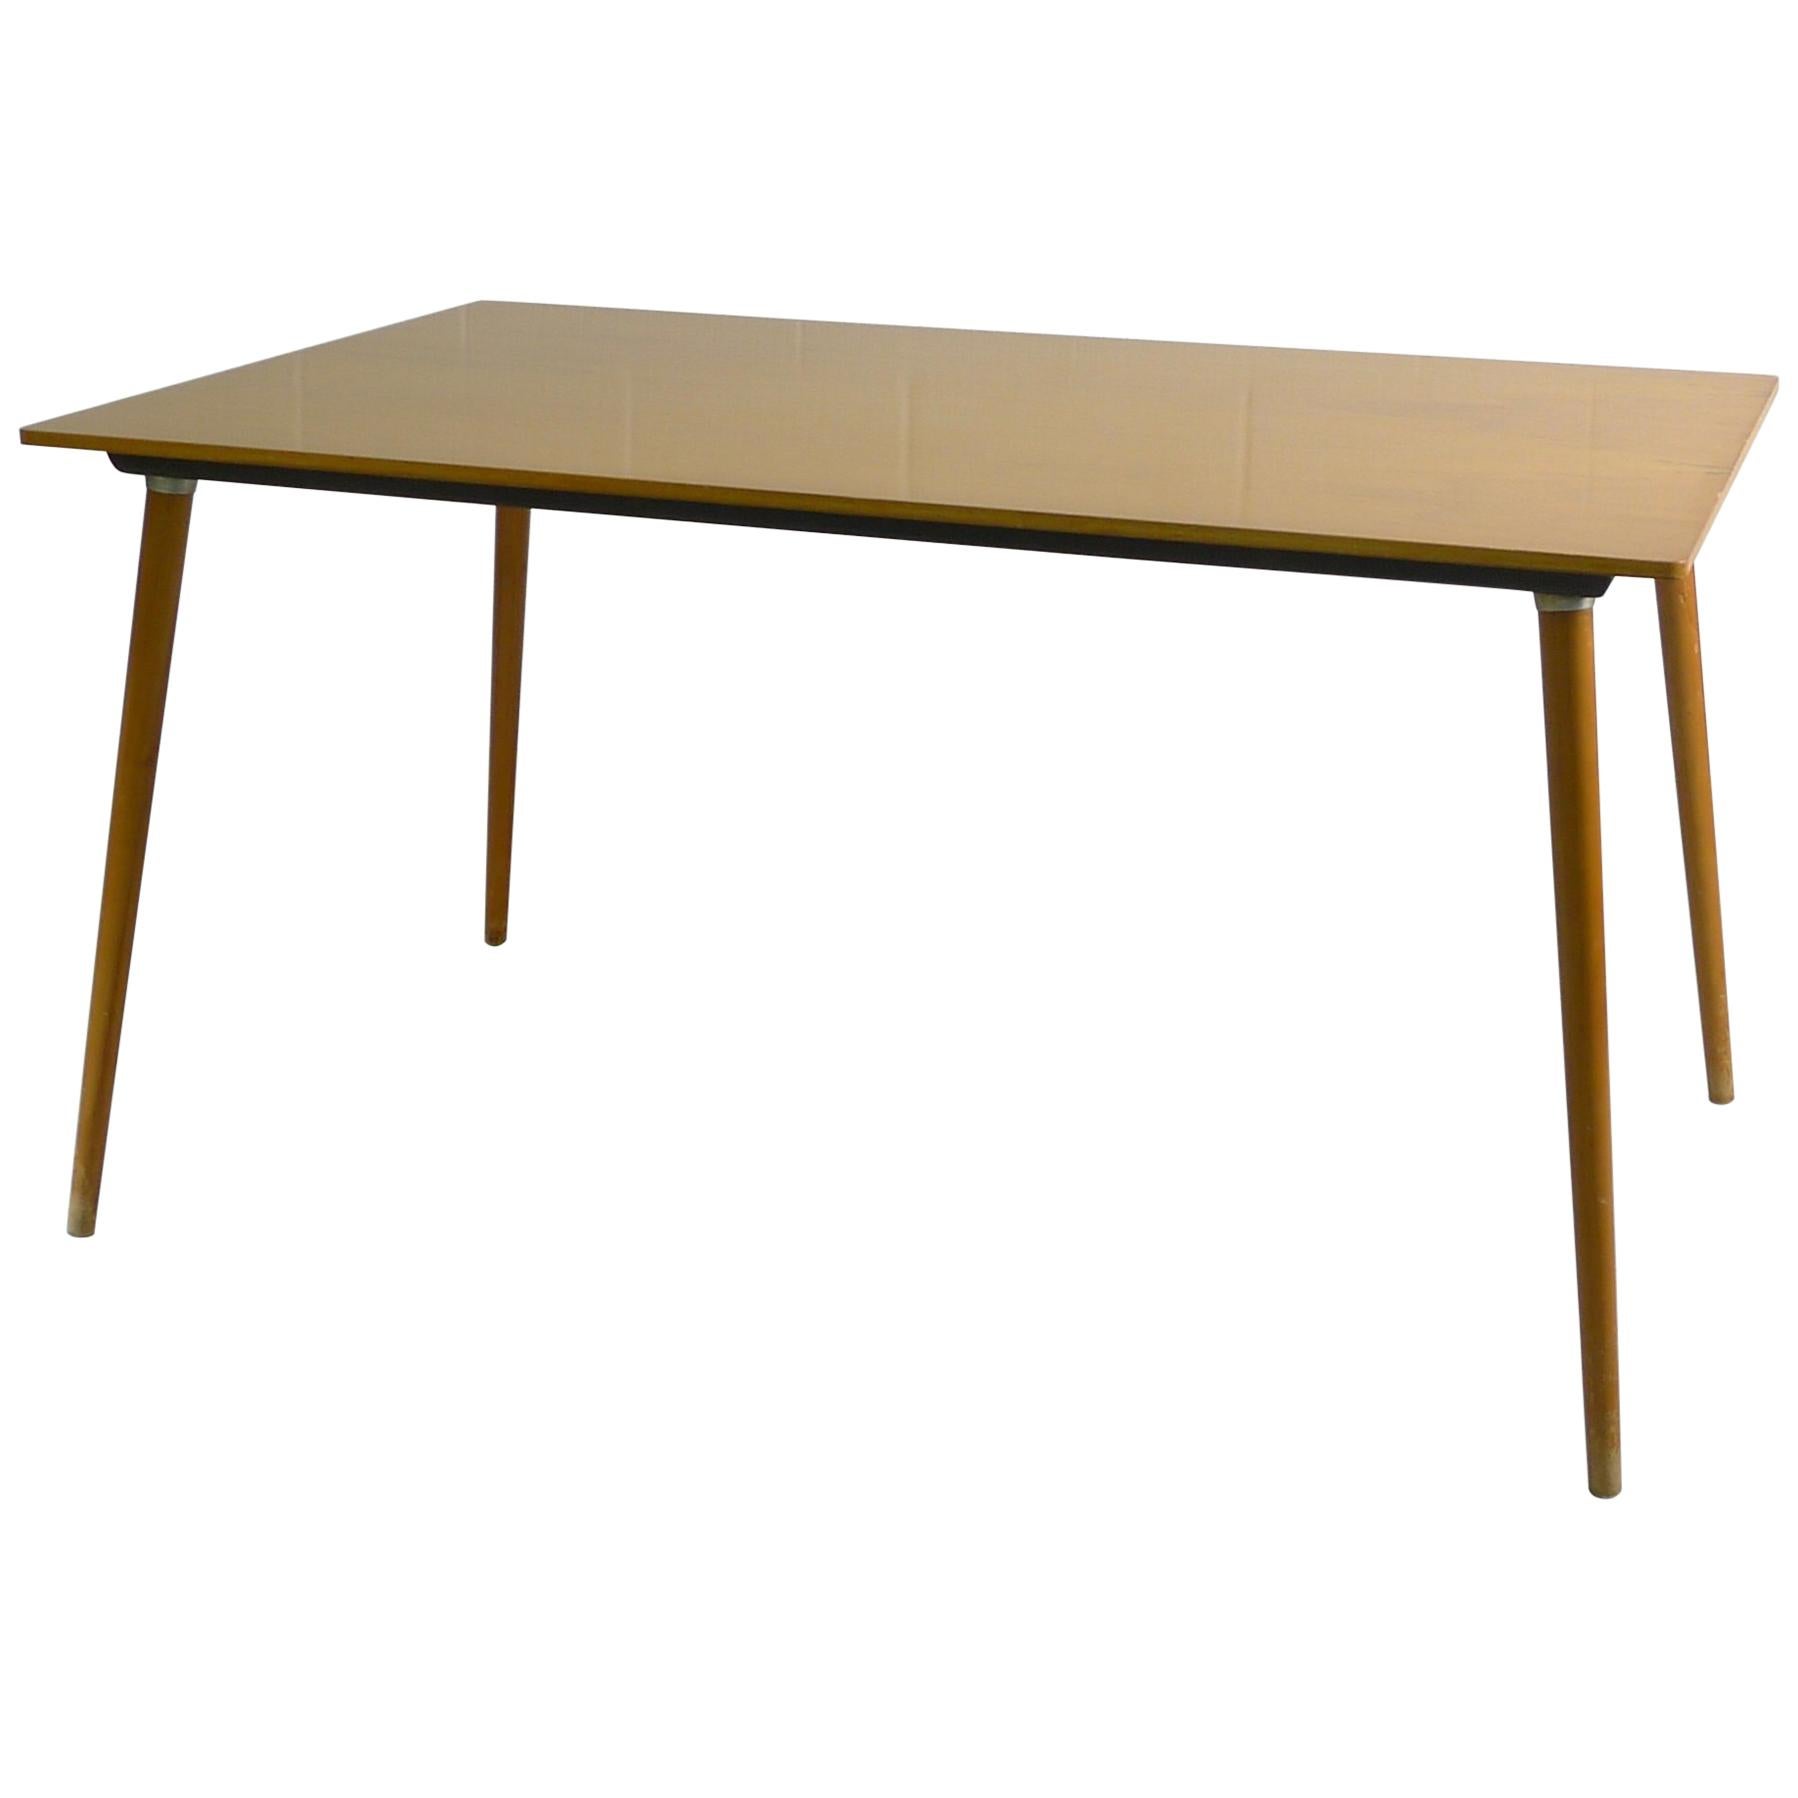 Eames DTW-3 Birch Dining Table, circa 1950, Herman Miller Production